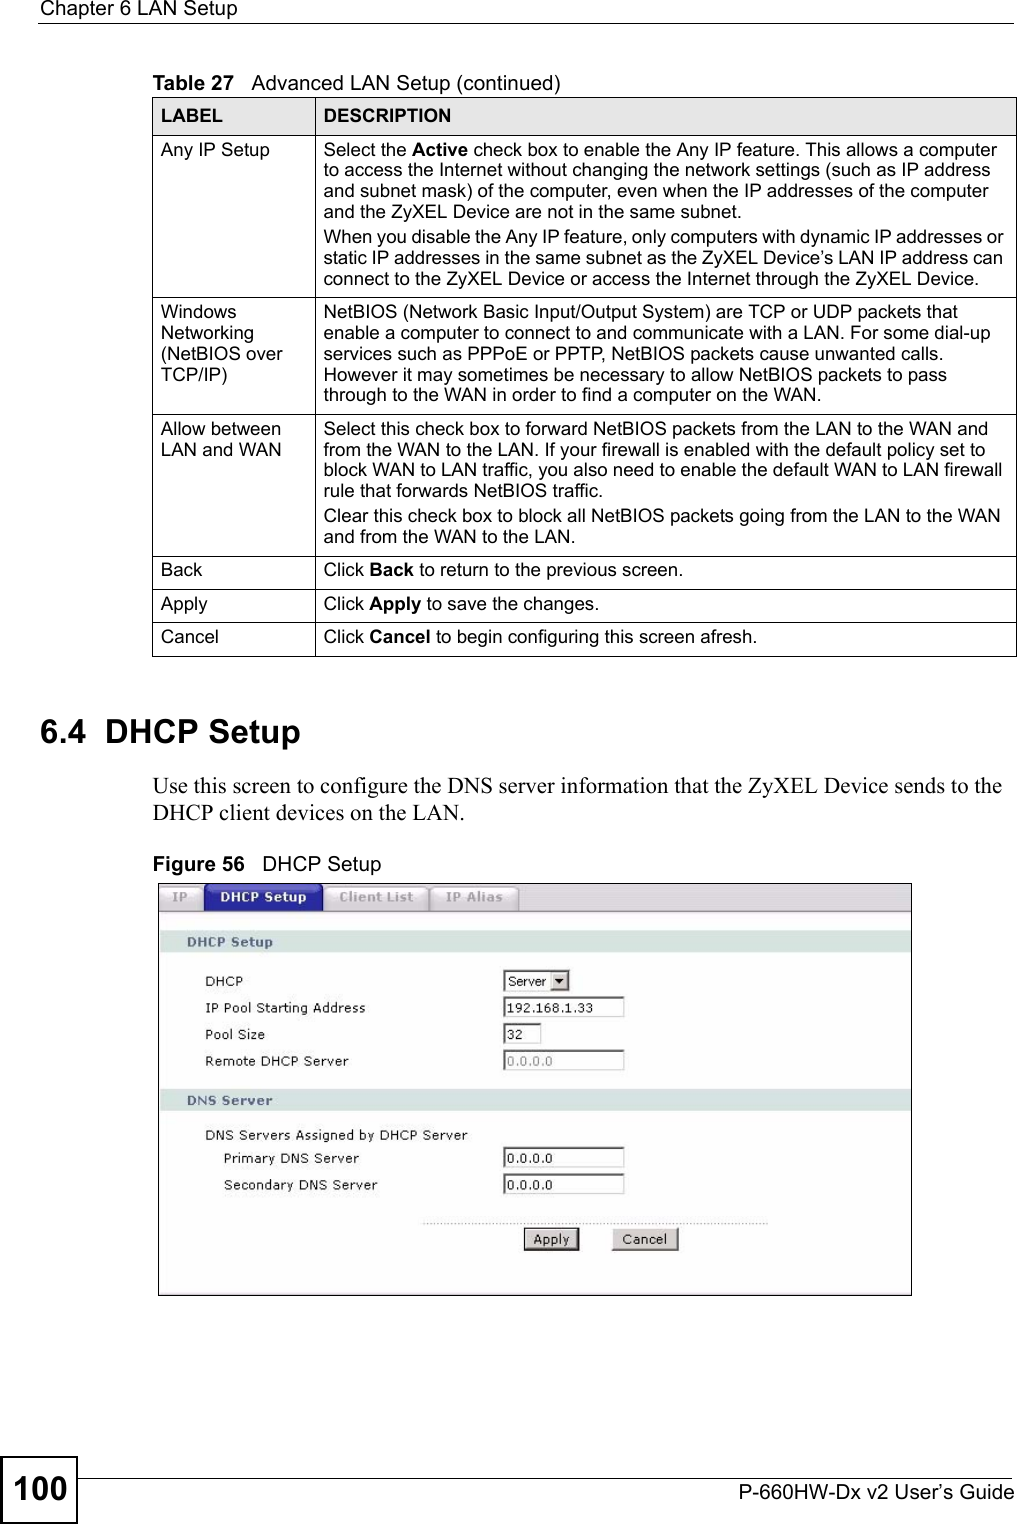 Chapter 6 LAN SetupP-660HW-Dx v2 User’s Guide1006.4  DHCP SetupUse this screen to configure the DNS server information that the ZyXEL Device sends to the DHCP client devices on the LAN.Figure 56   DHCP SetupAny IP Setup Select the Active check box to enable the Any IP feature. This allows a computer to access the Internet without changing the network settings (such as IP address and subnet mask) of the computer, even when the IP addresses of the computer and the ZyXEL Device are not in the same subnet. When you disable the Any IP feature, only computers with dynamic IP addresses or static IP addresses in the same subnet as the ZyXEL Device’s LAN IP address can connect to the ZyXEL Device or access the Internet through the ZyXEL Device.Windows Networking (NetBIOS over TCP/IP)NetBIOS (Network Basic Input/Output System) are TCP or UDP packets that enable a computer to connect to and communicate with a LAN. For some dial-up services such as PPPoE or PPTP, NetBIOS packets cause unwanted calls. However it may sometimes be necessary to allow NetBIOS packets to pass through to the WAN in order to find a computer on the WAN.Allow between LAN and WANSelect this check box to forward NetBIOS packets from the LAN to the WAN and from the WAN to the LAN. If your firewall is enabled with the default policy set to block WAN to LAN traffic, you also need to enable the default WAN to LAN firewall rule that forwards NetBIOS traffic.Clear this check box to block all NetBIOS packets going from the LAN to the WAN and from the WAN to the LAN.Back Click Back to return to the previous screen.Apply Click Apply to save the changes. Cancel Click Cancel to begin configuring this screen afresh.Table 27   Advanced LAN Setup (continued)LABEL DESCRIPTION